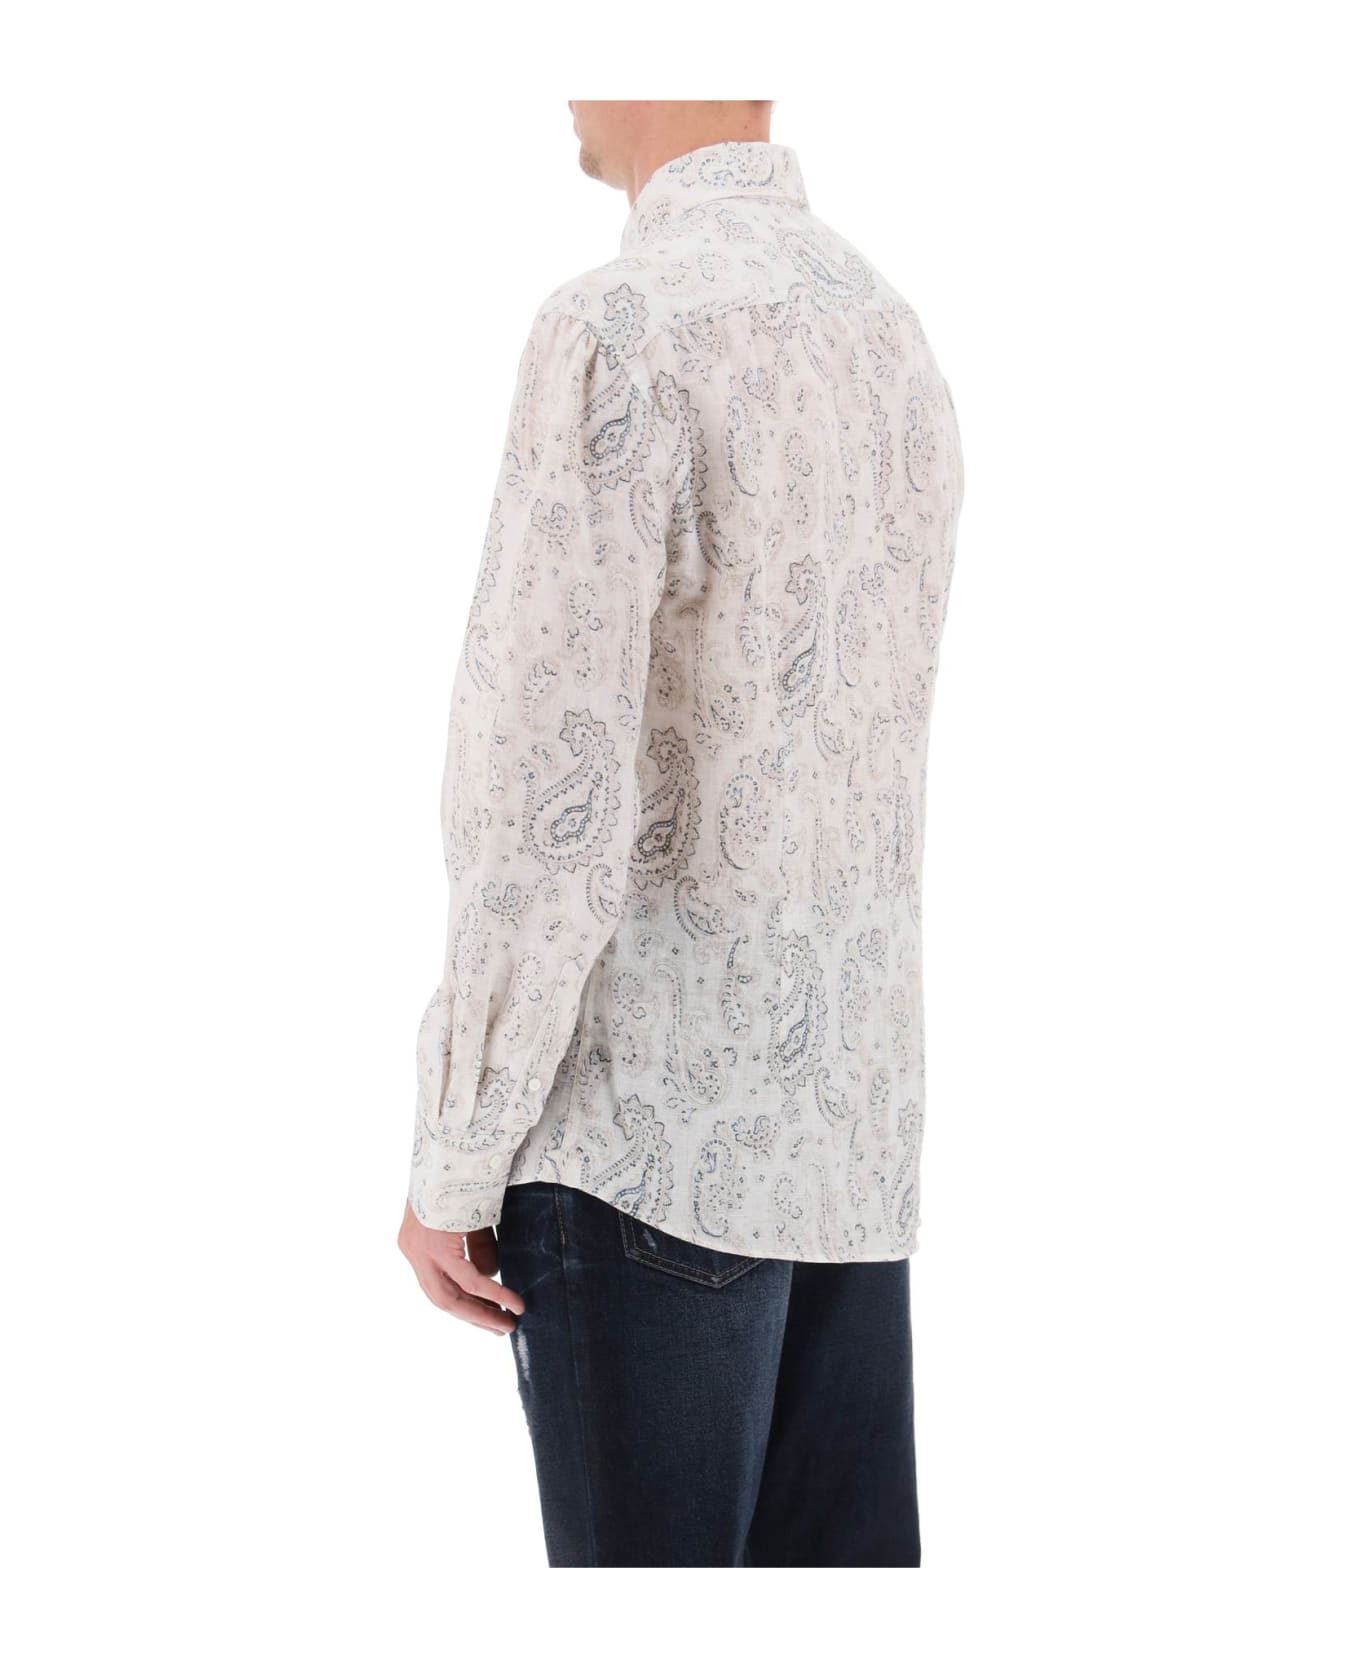 Brunello Cucinelli Linen Shirt With Paisley Pattern - BROWN PRUSSIA (White) シャツ